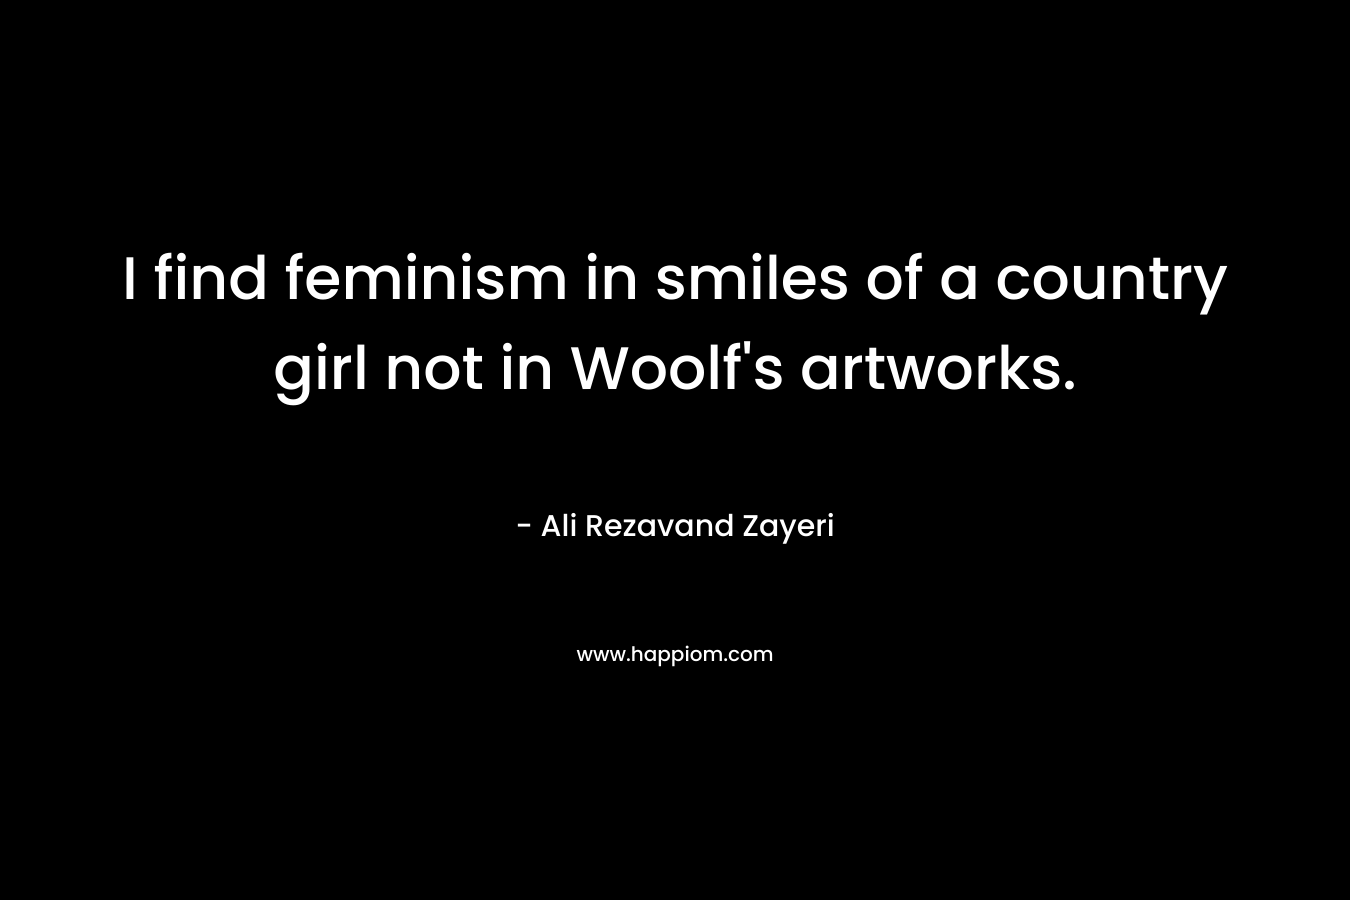 I find feminism in smiles of a country girl not in Woolf's artworks.